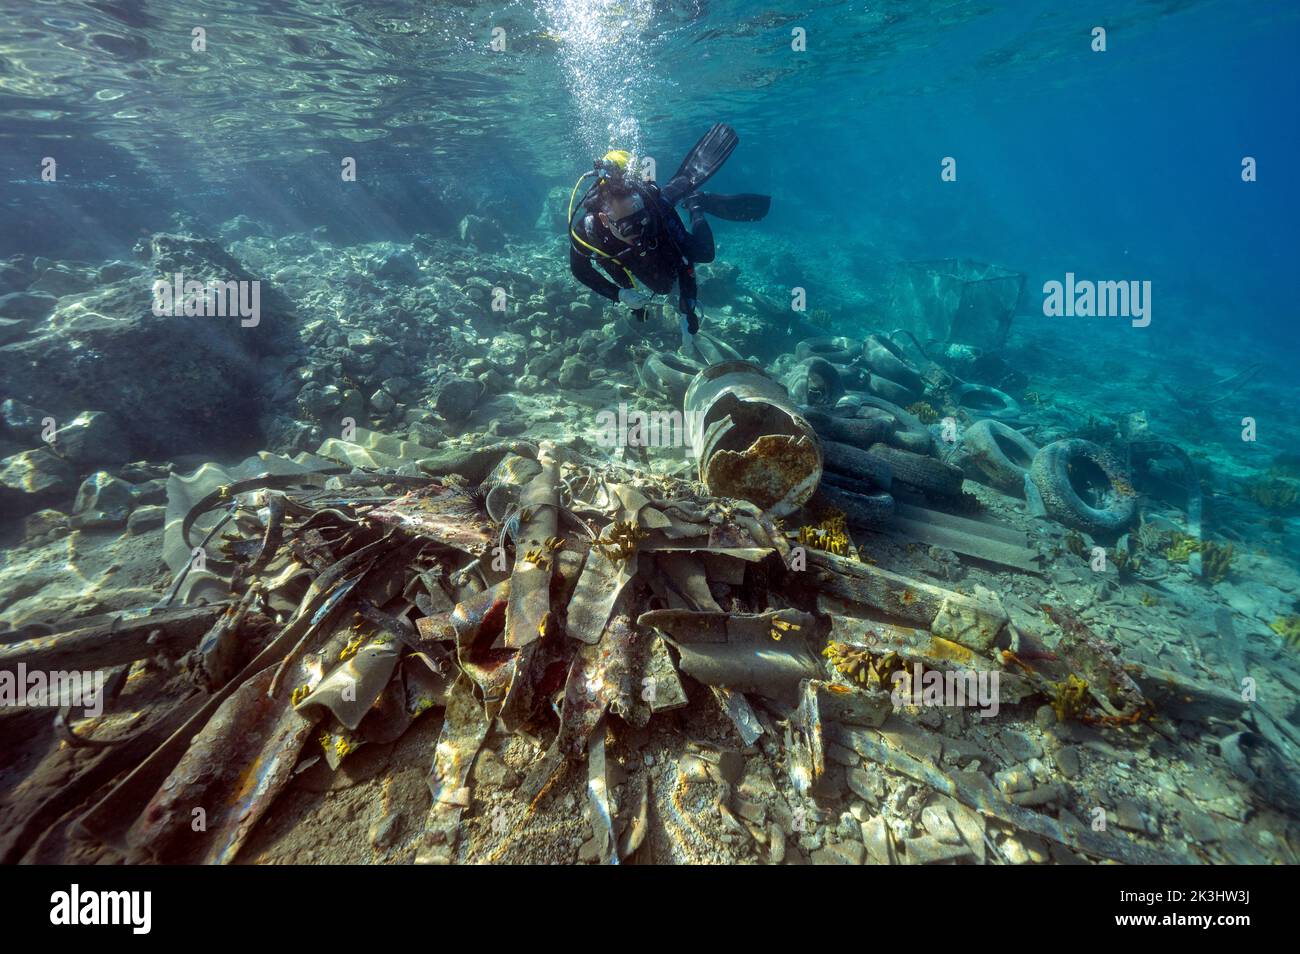 Underwater clean-up of extensive garbages over the ancient shipwreck Bozburun Marmaris Turkey. Stock Photo